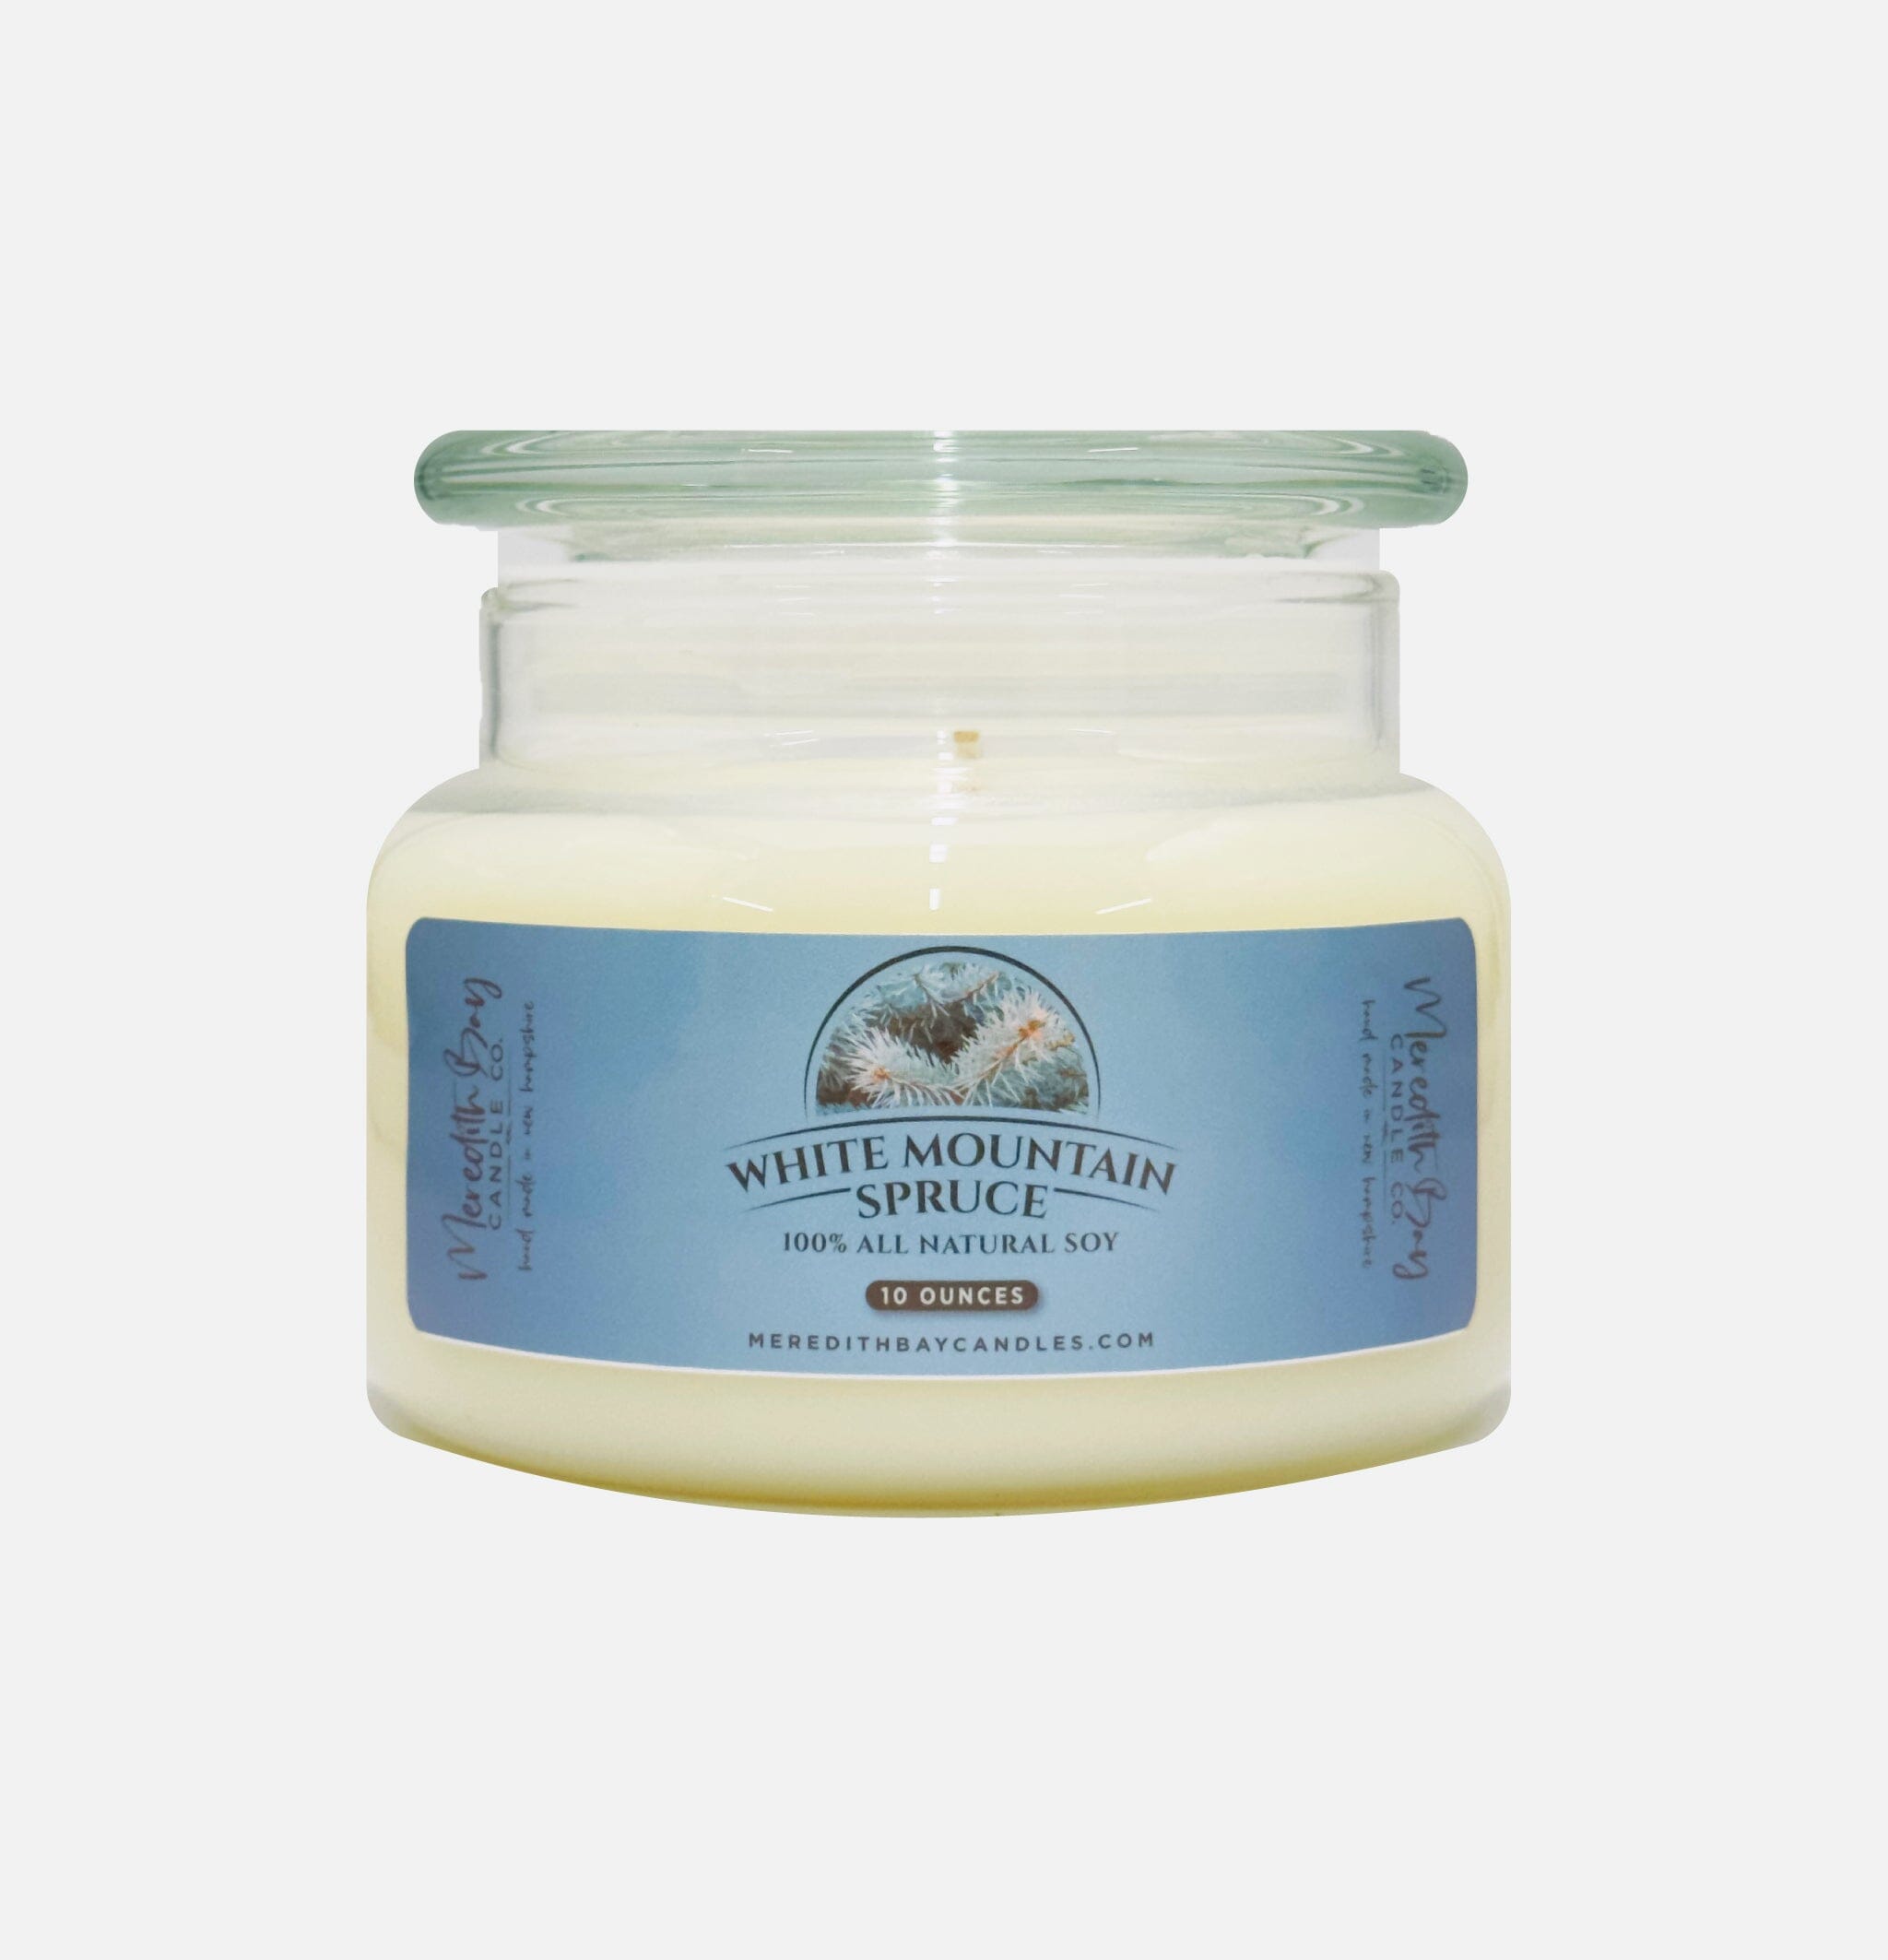 White Mountain Spruce Soy Candle Meredith Bay Candle Co 10 Oz 